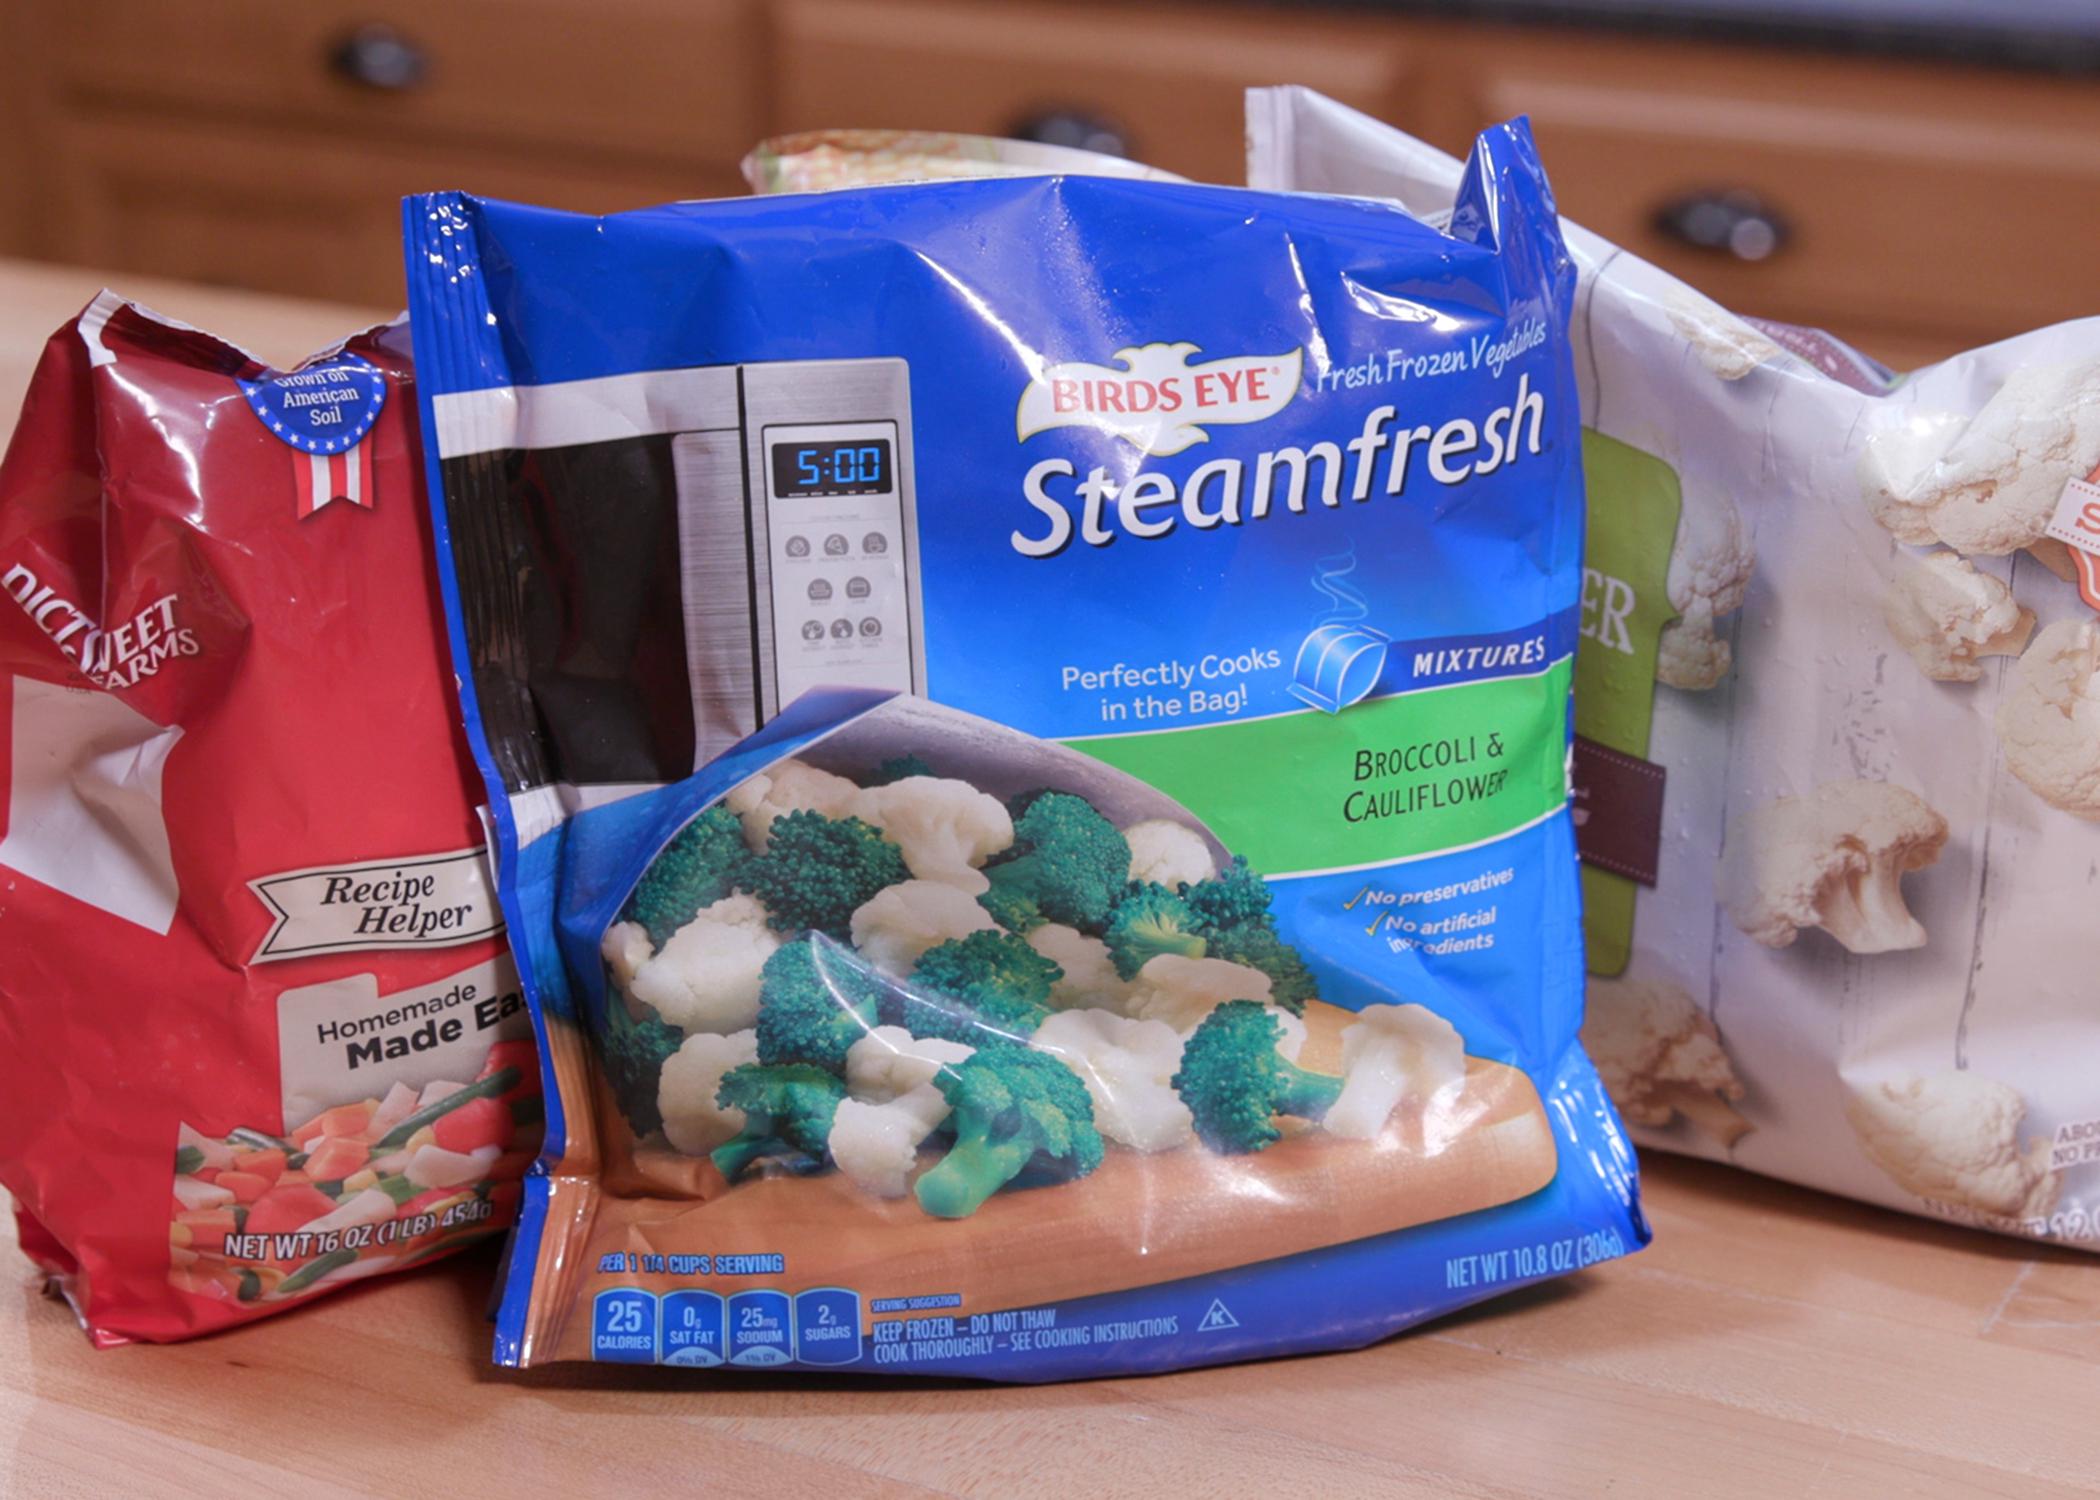 Three bags of frozen vegetables sit on a counter.